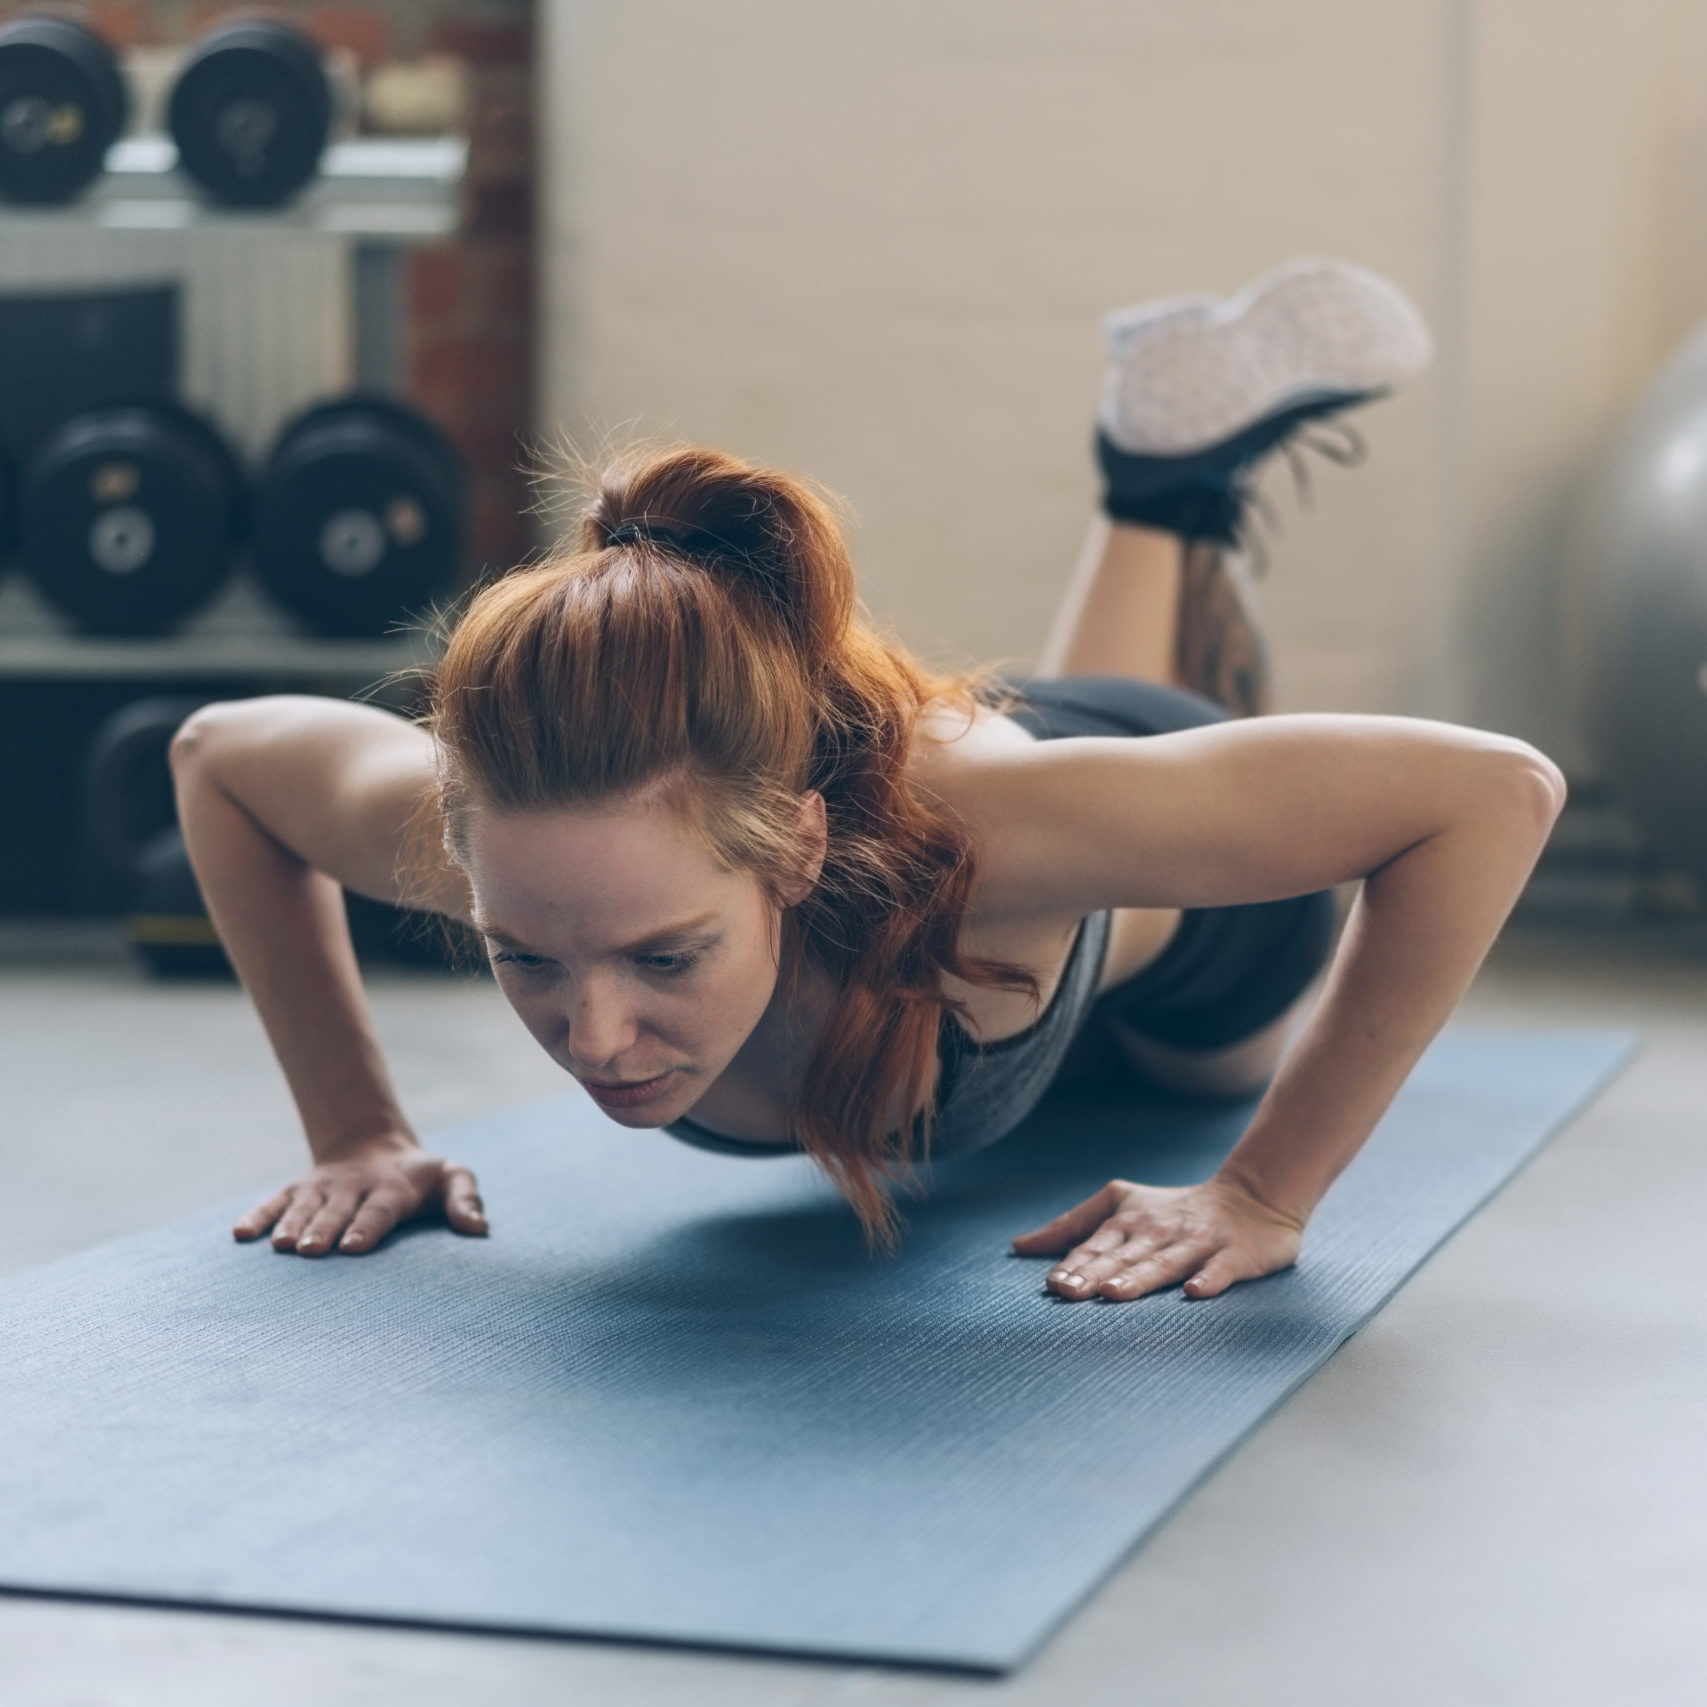 Fit young woman working out doing press ups on a yoga mat in a gym in a low angle view with gym equipment in the background